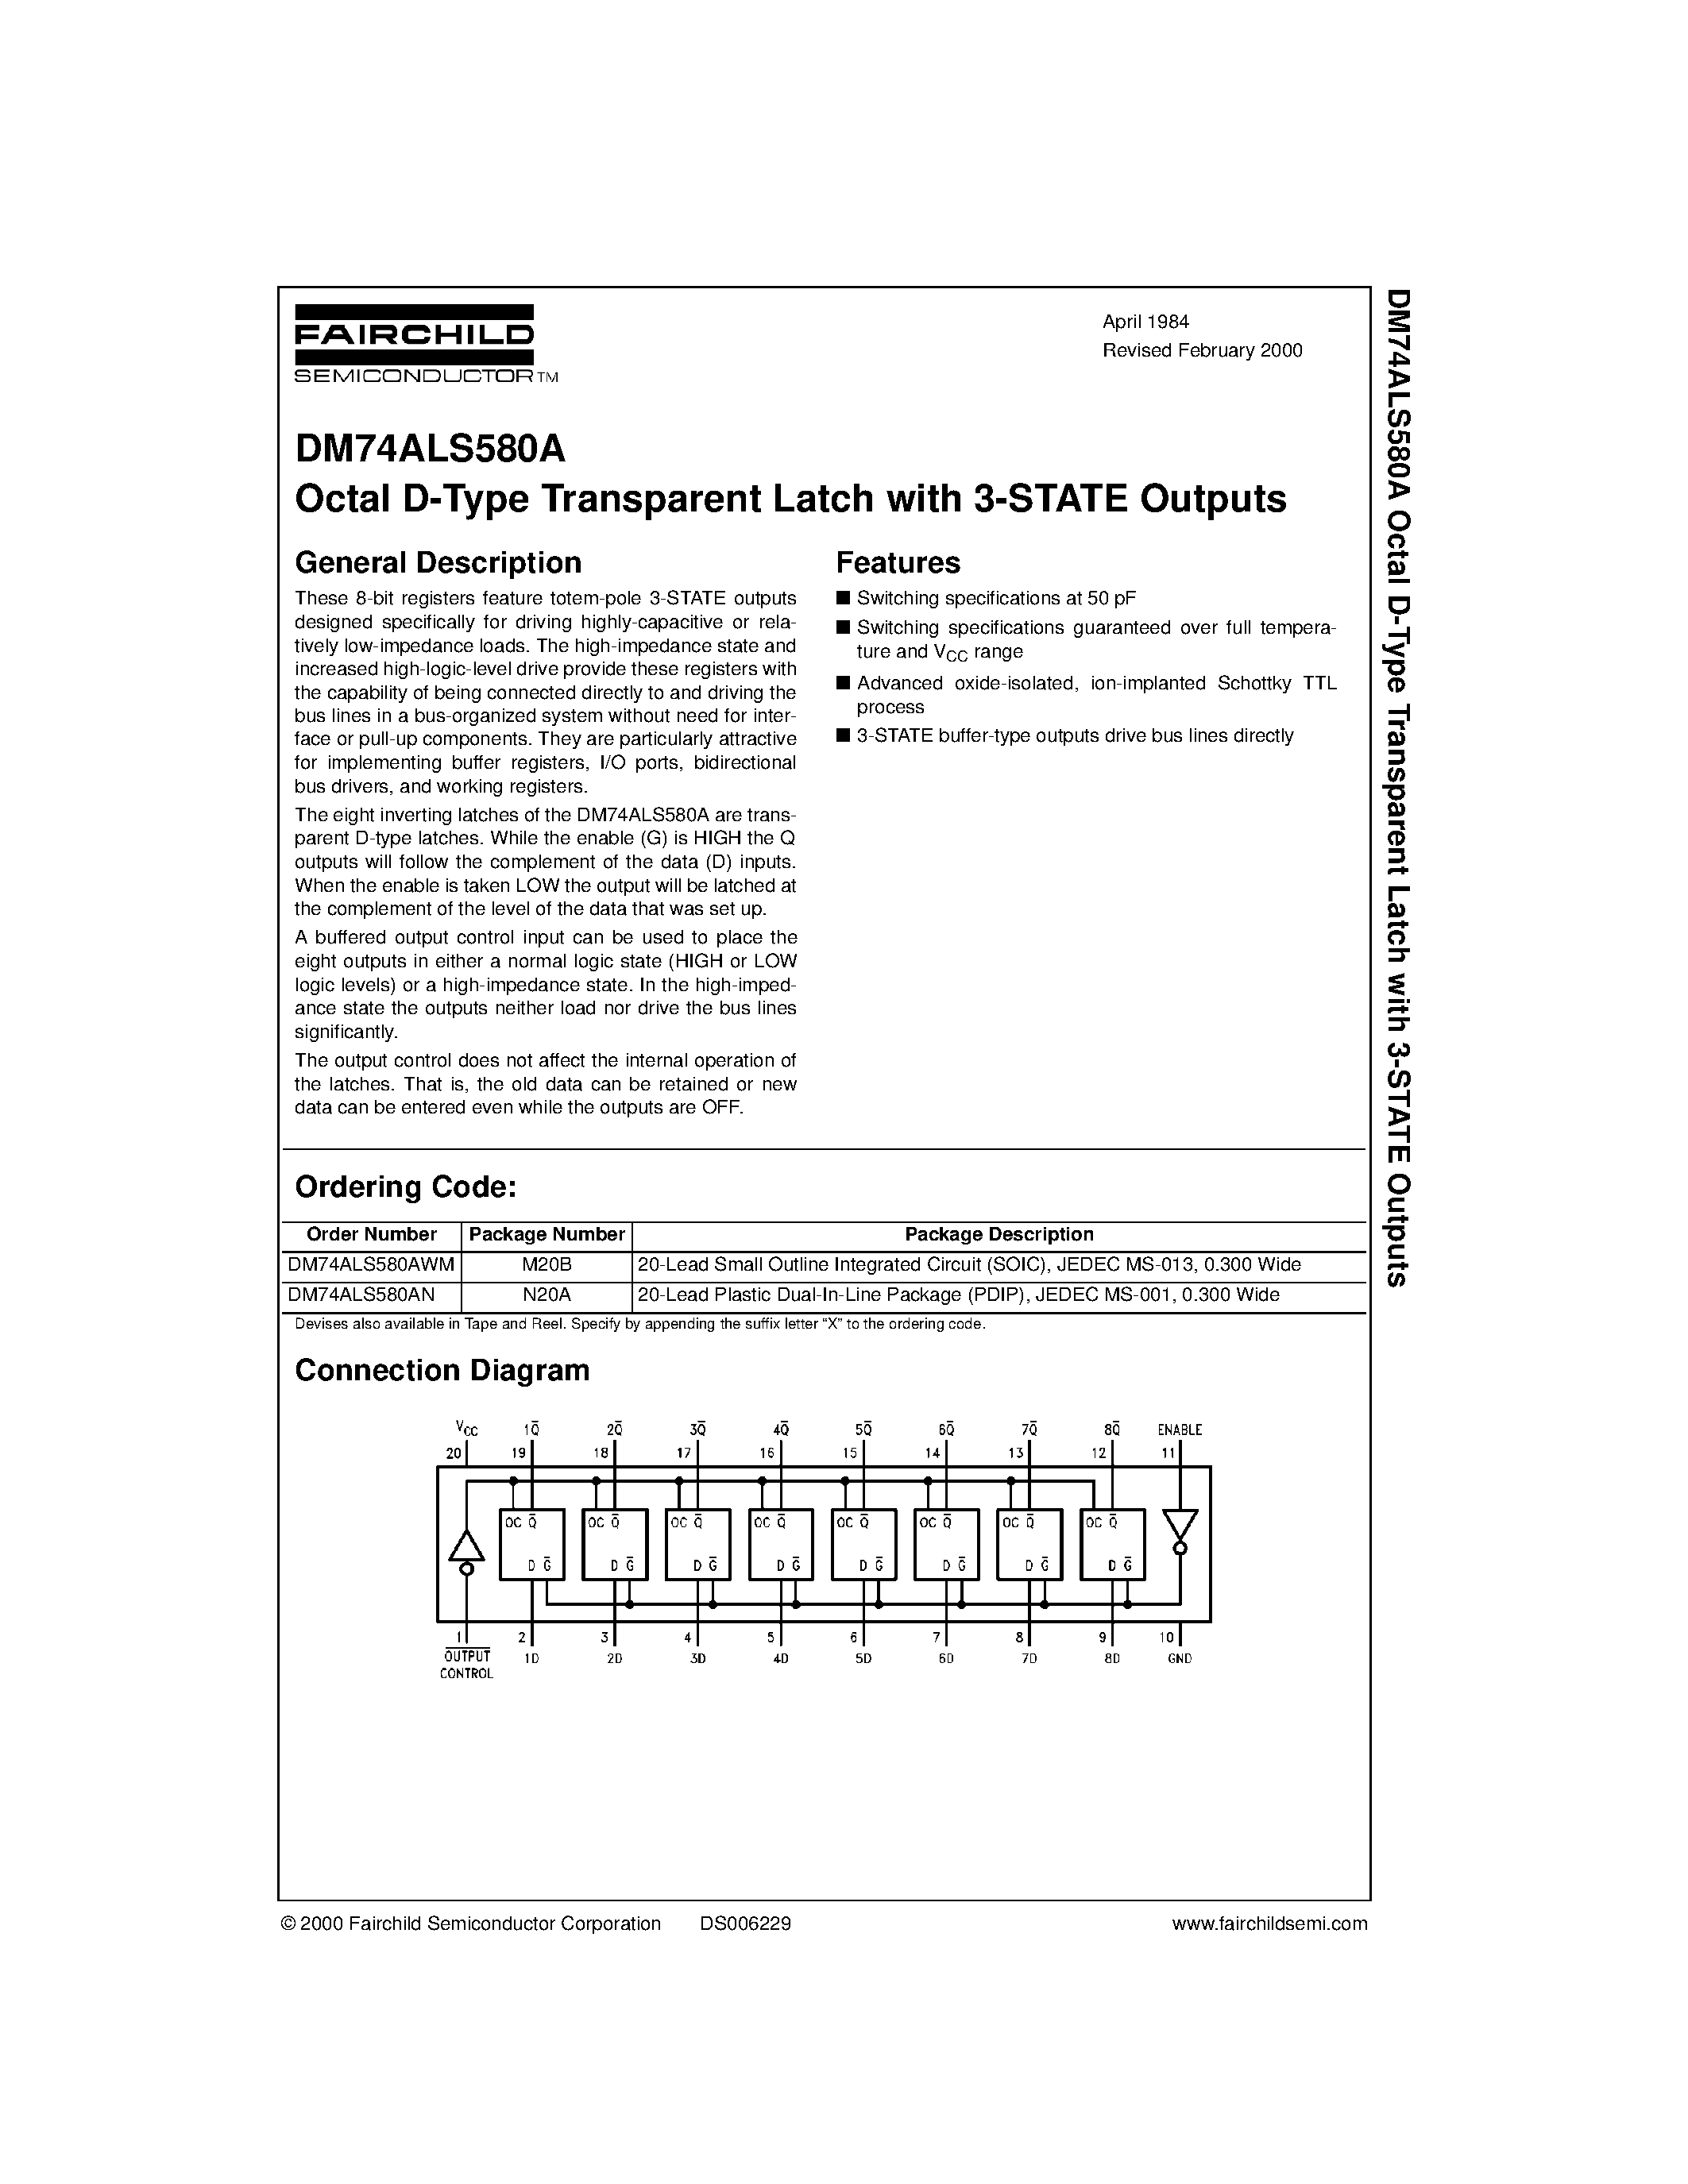 Datasheet DM74ALS580AWM - Octal D-Type Transparent Latch with 3-STATE Outputs page 1